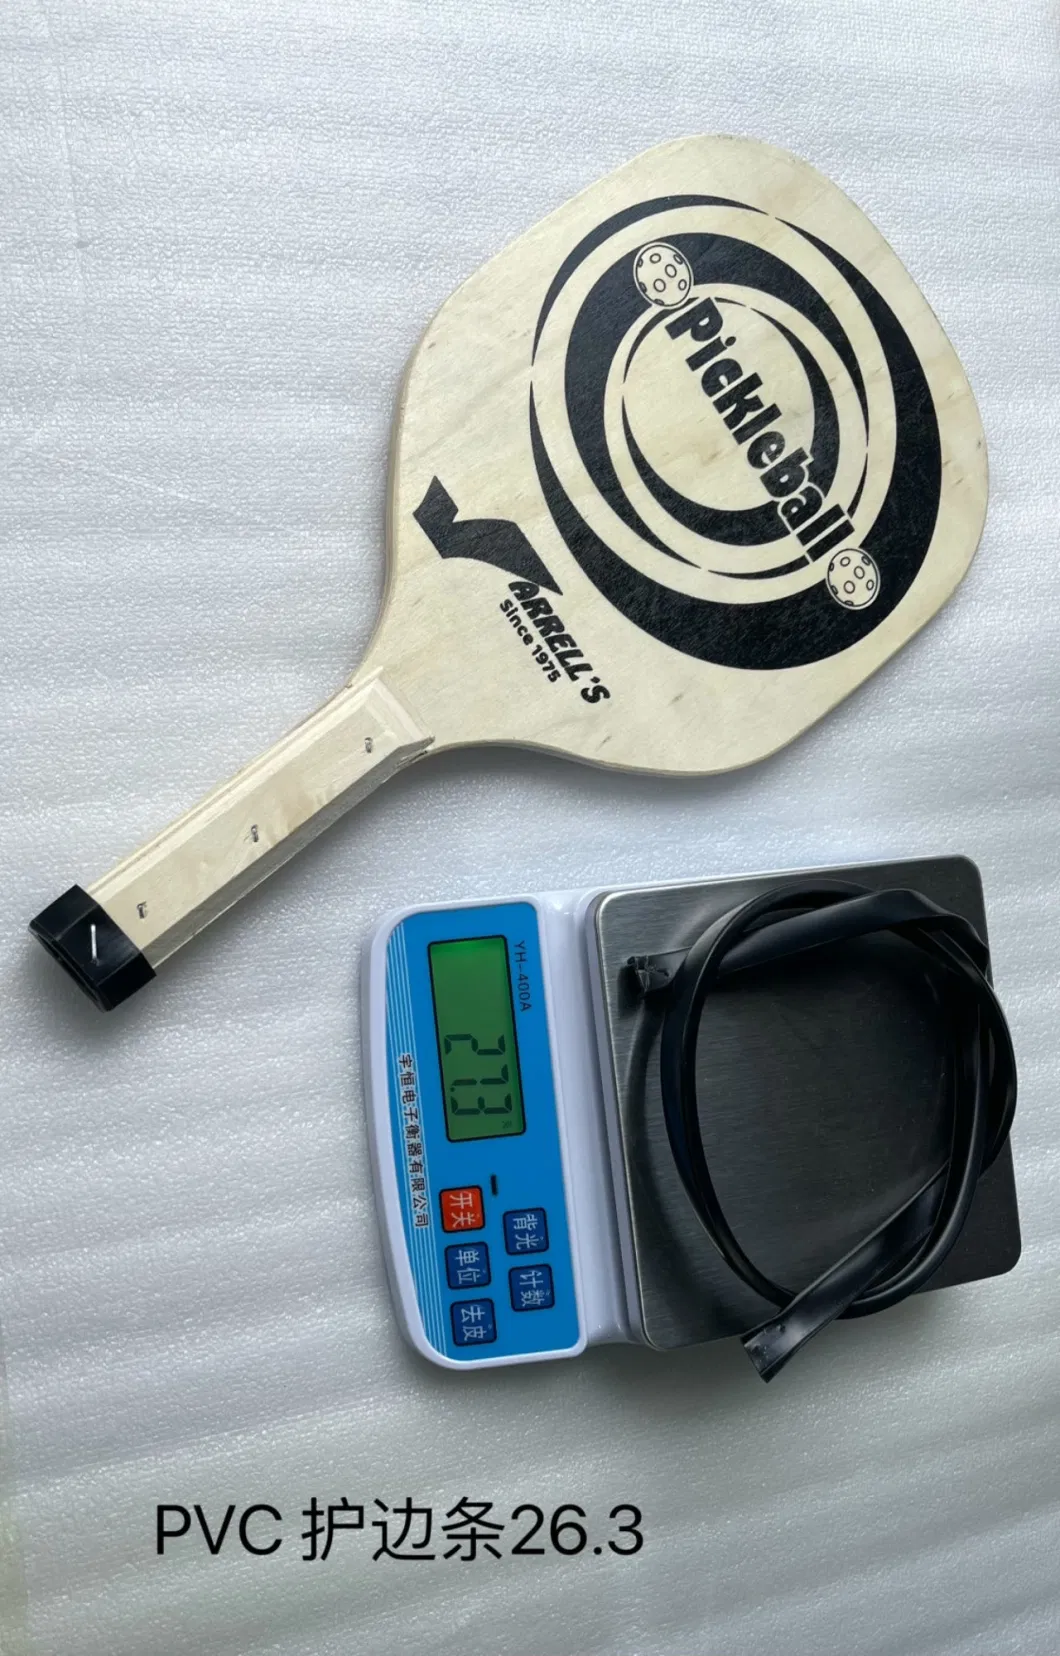 Pickleball Paddle Wood with PVC Edge Guard Pickle Ball Paddles Beginner Racket